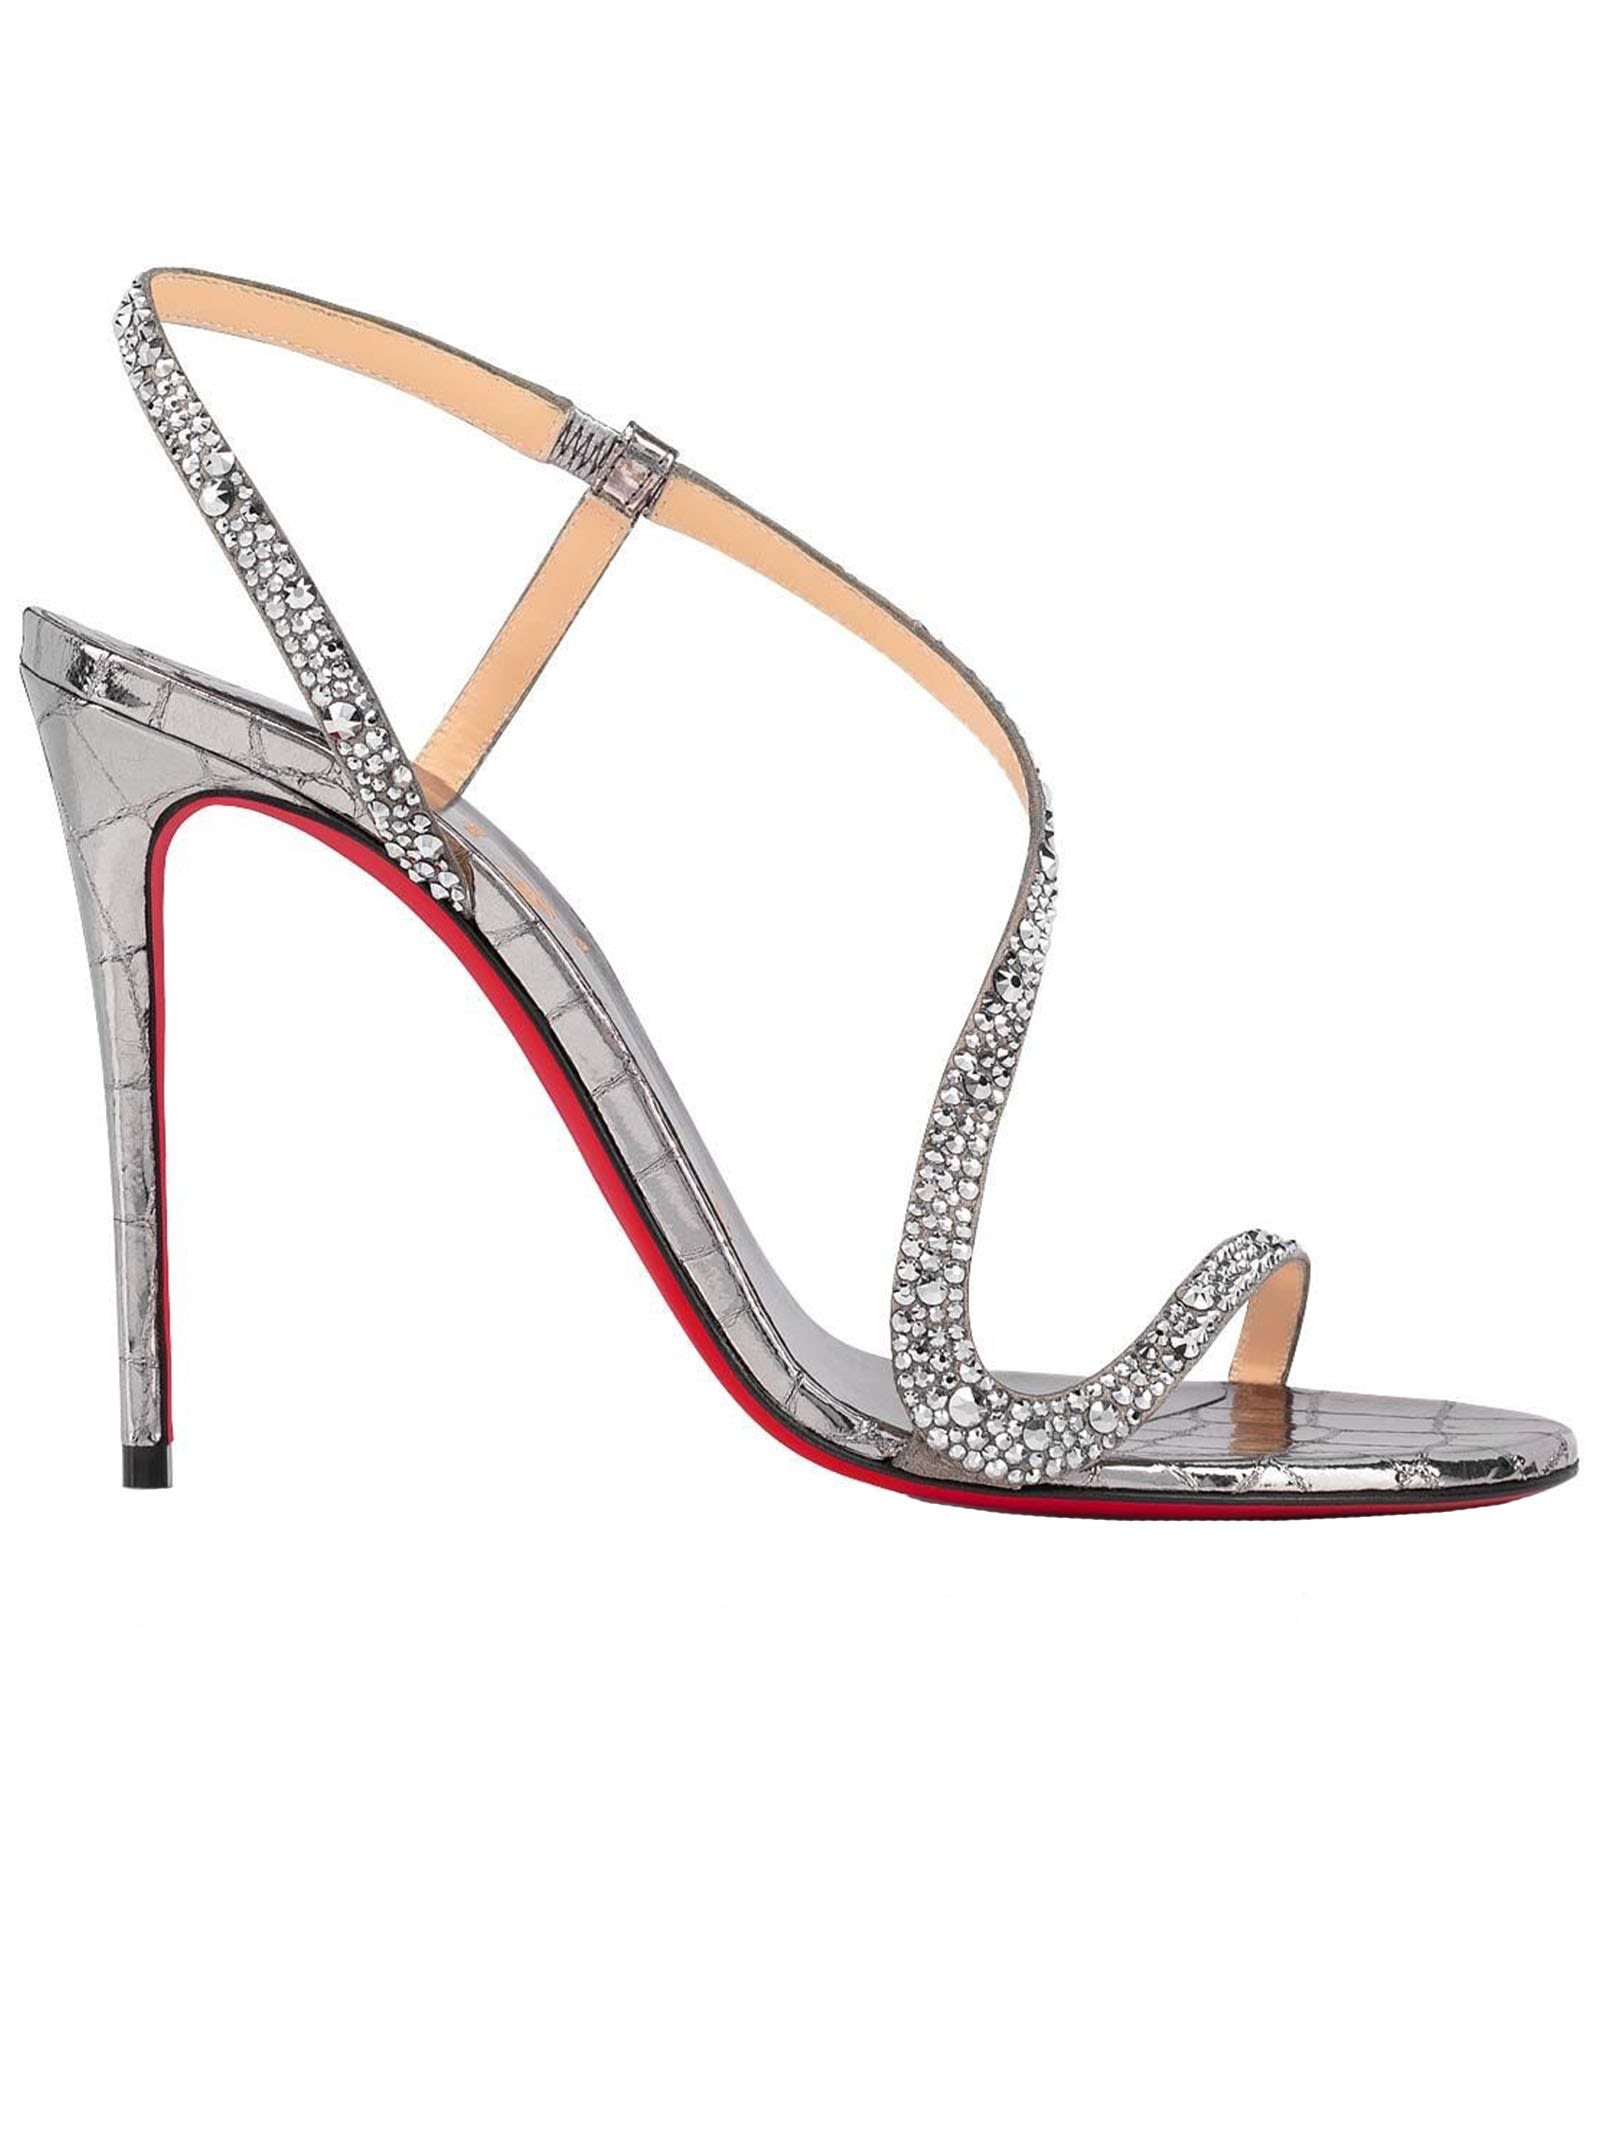 CHRISTIAN LOUBOUTIN SILVER LEATHER ROSALIE STRASS 100 SANDALS WITH SWAROVSKI,3210484 S260